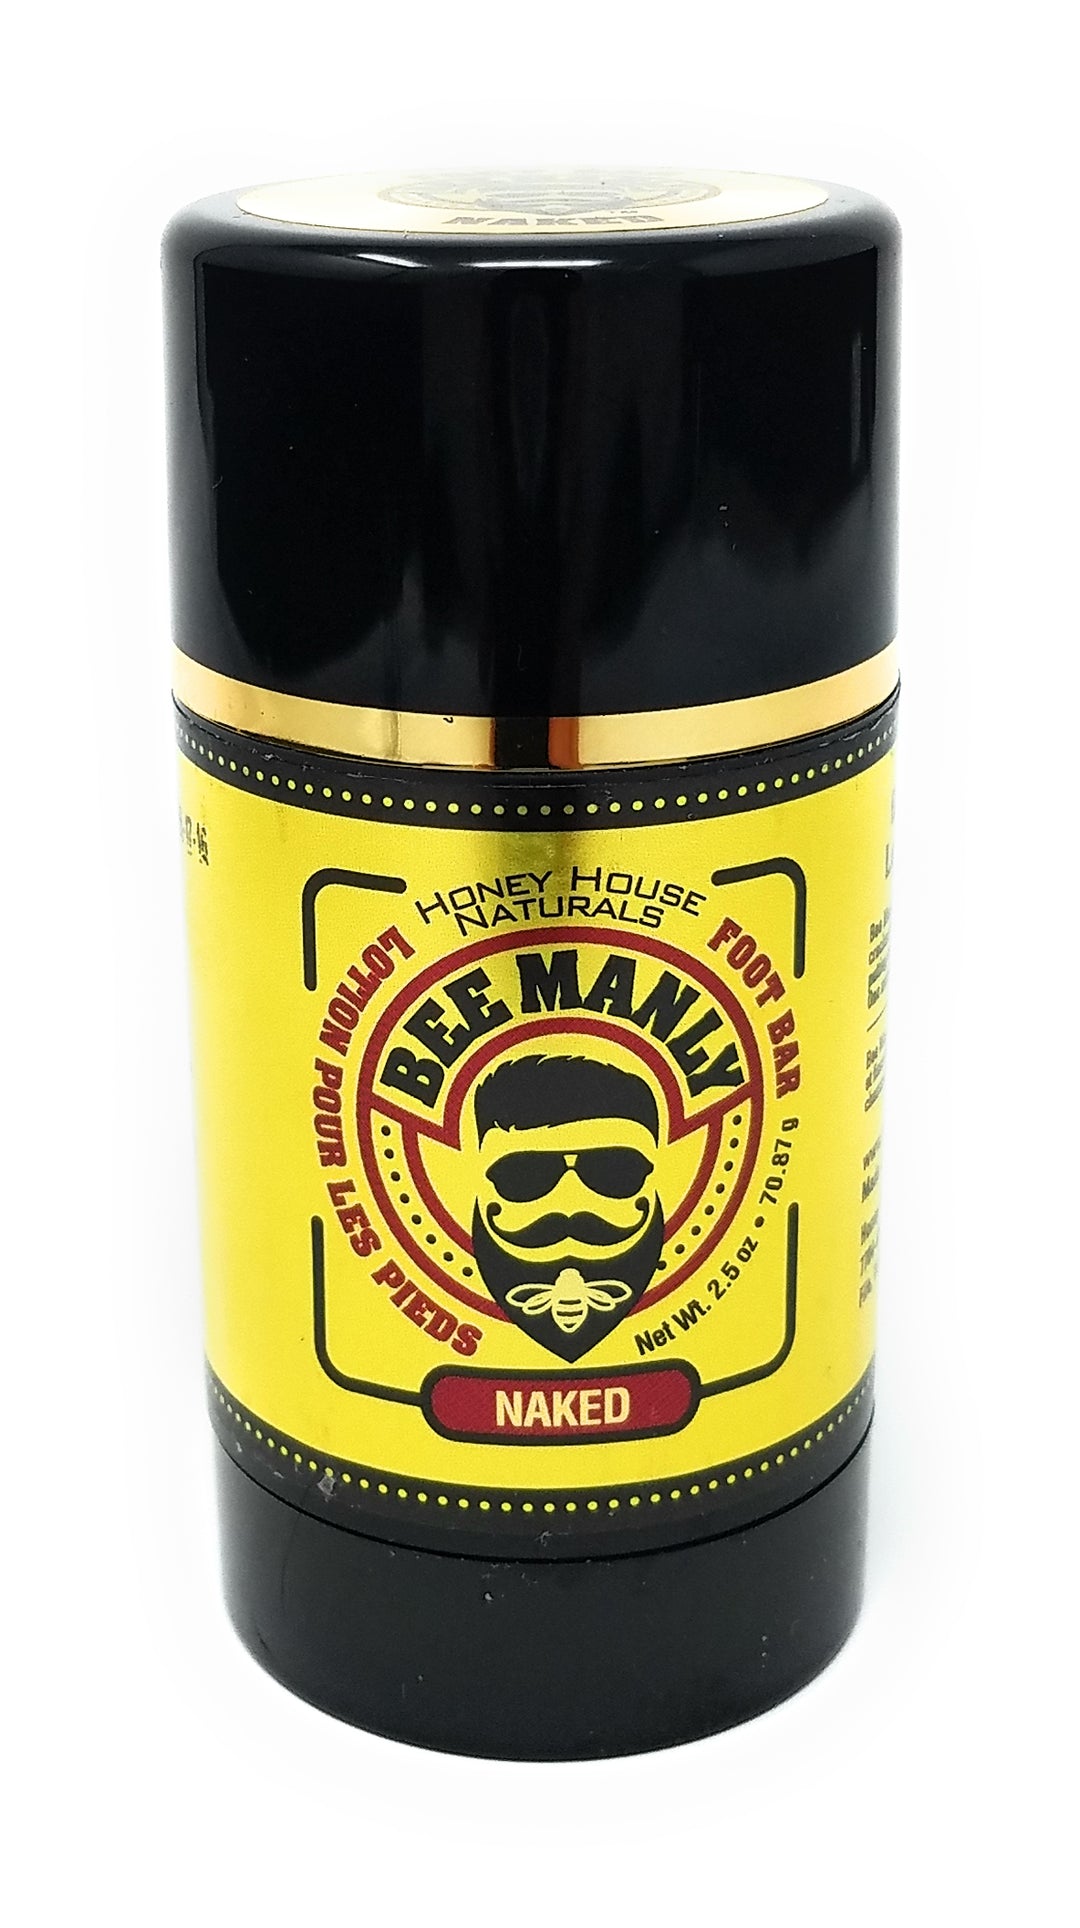 Bee Manly Foot Bar Lotion